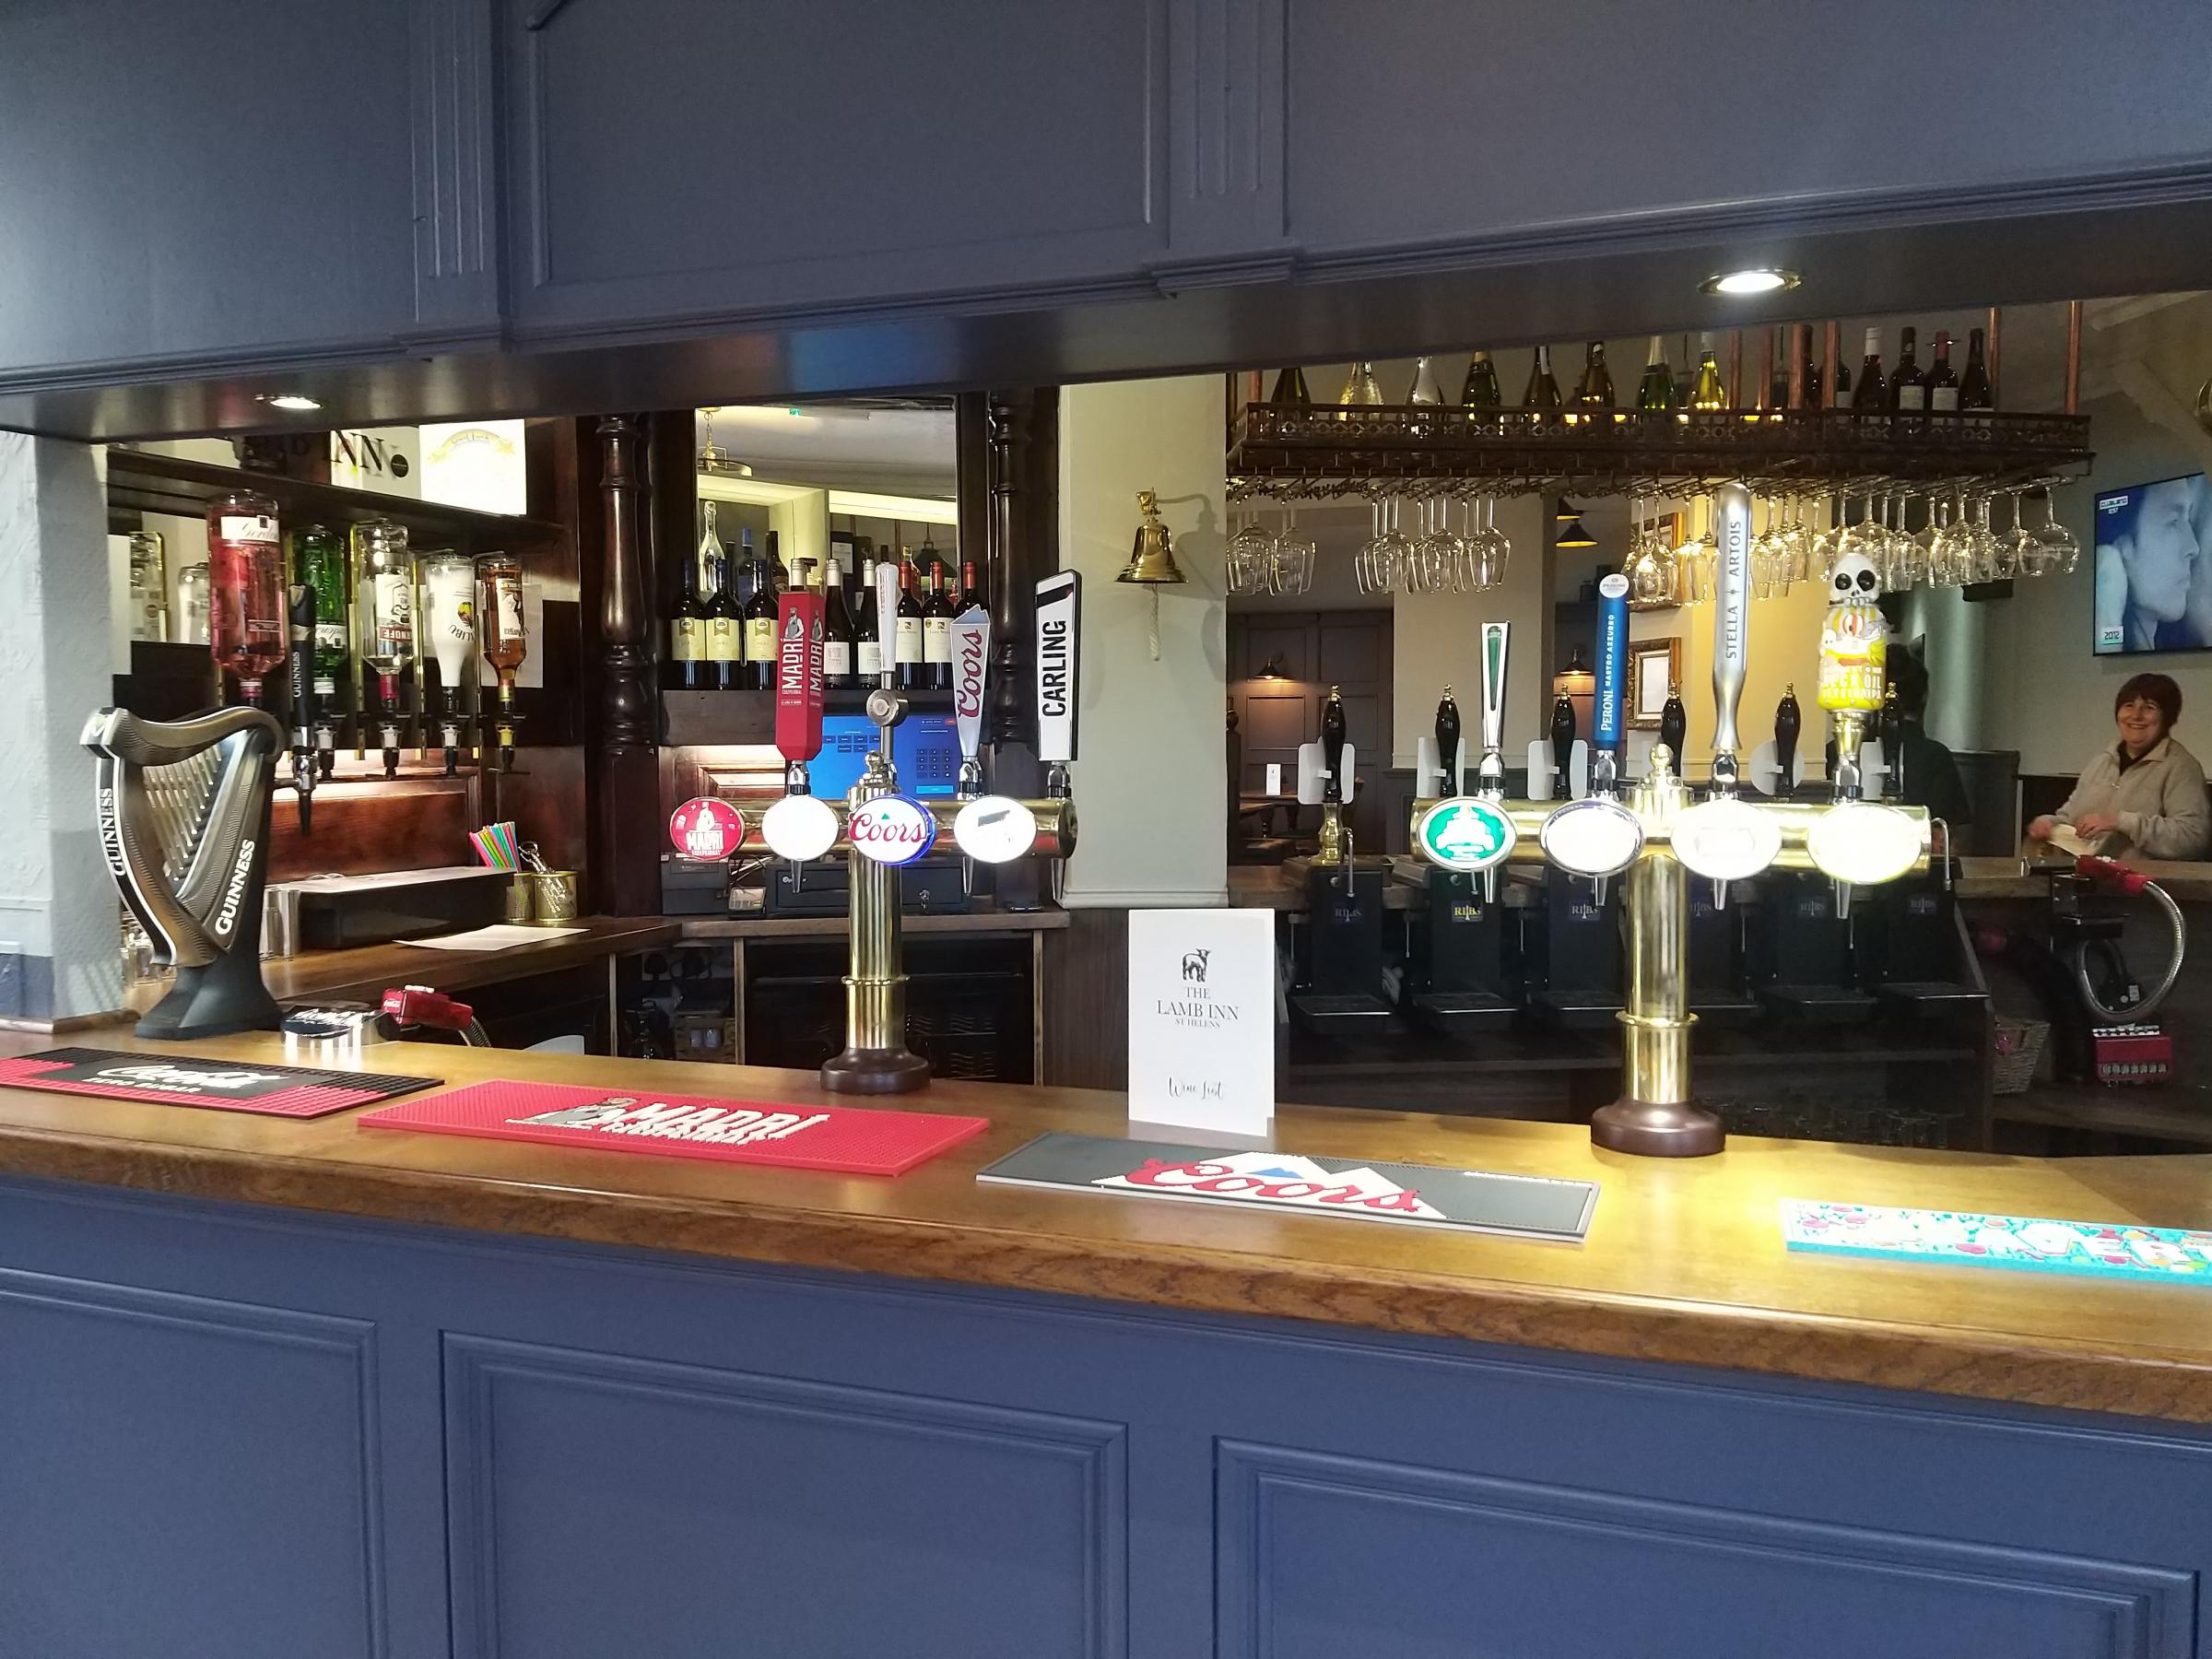 The renovated Lamb pub has reopened